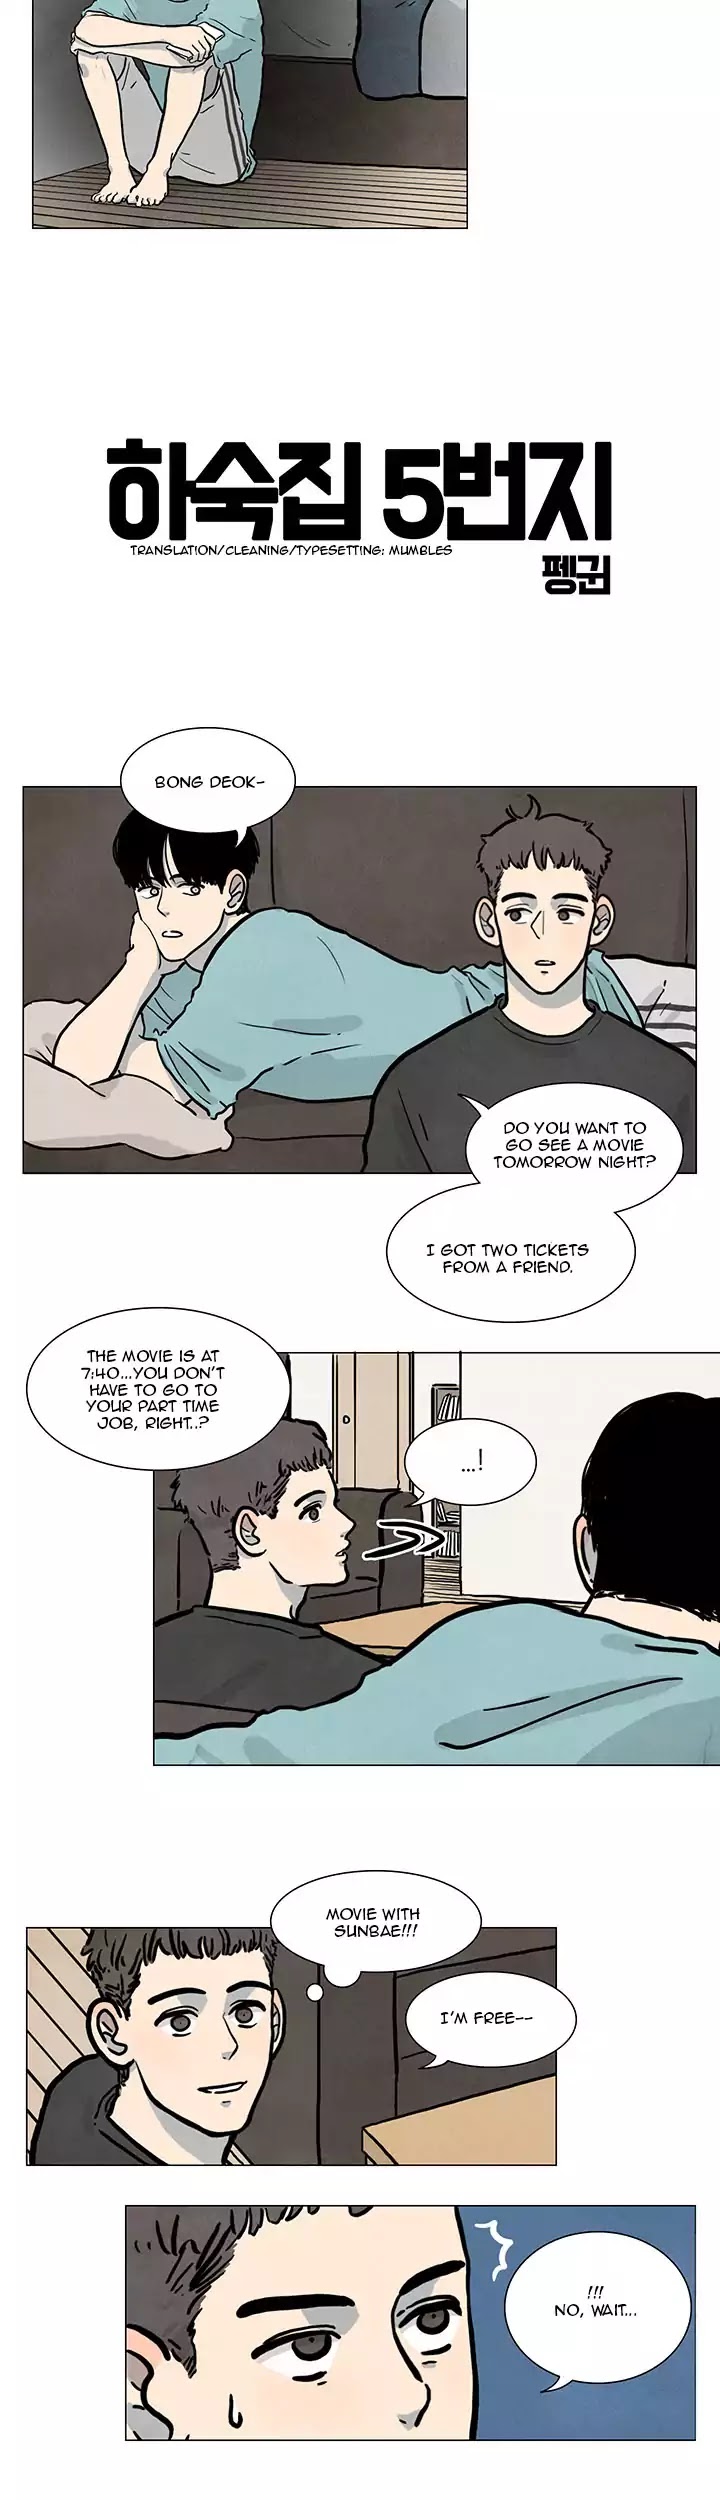 Boarding House Number 5 - Page 2